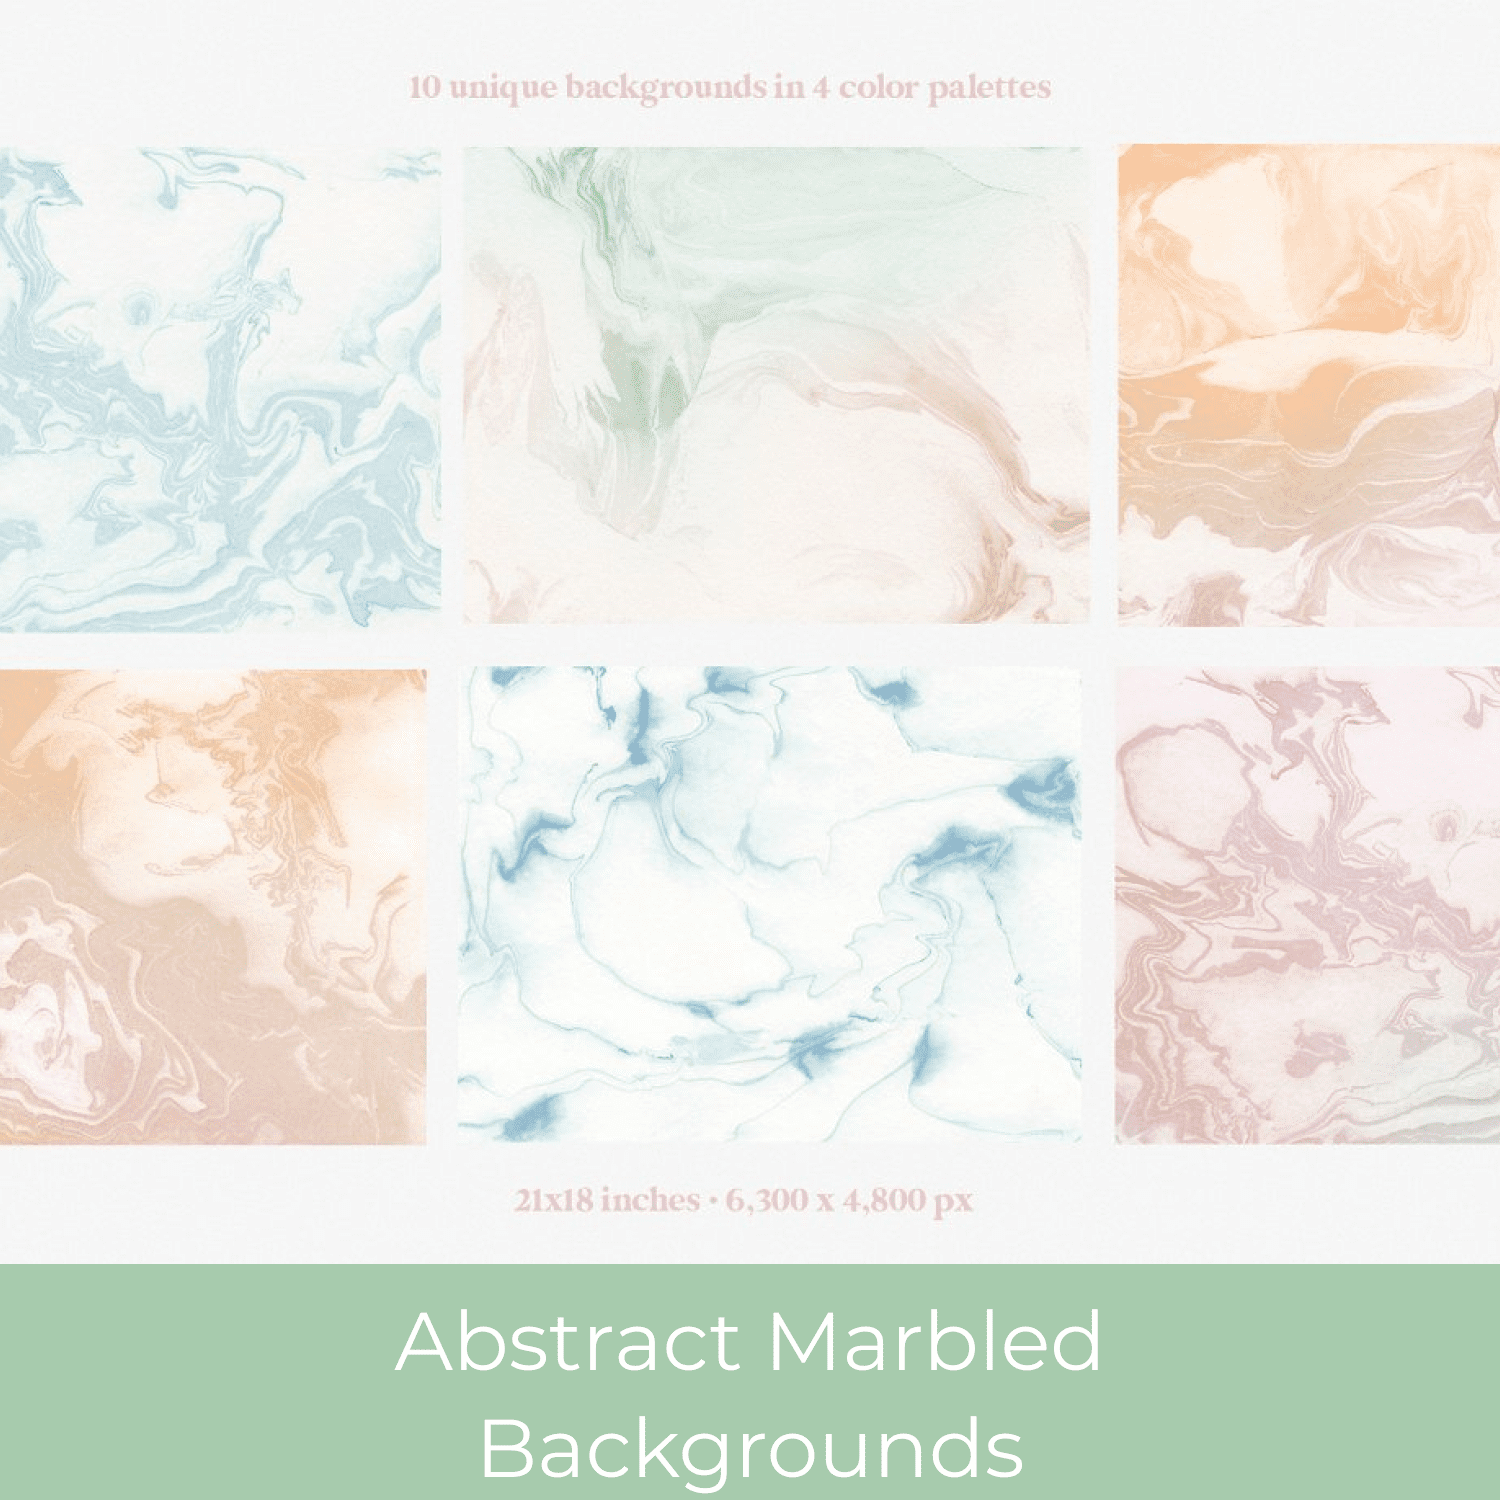 Abstract Marbled Backgrounds cover.